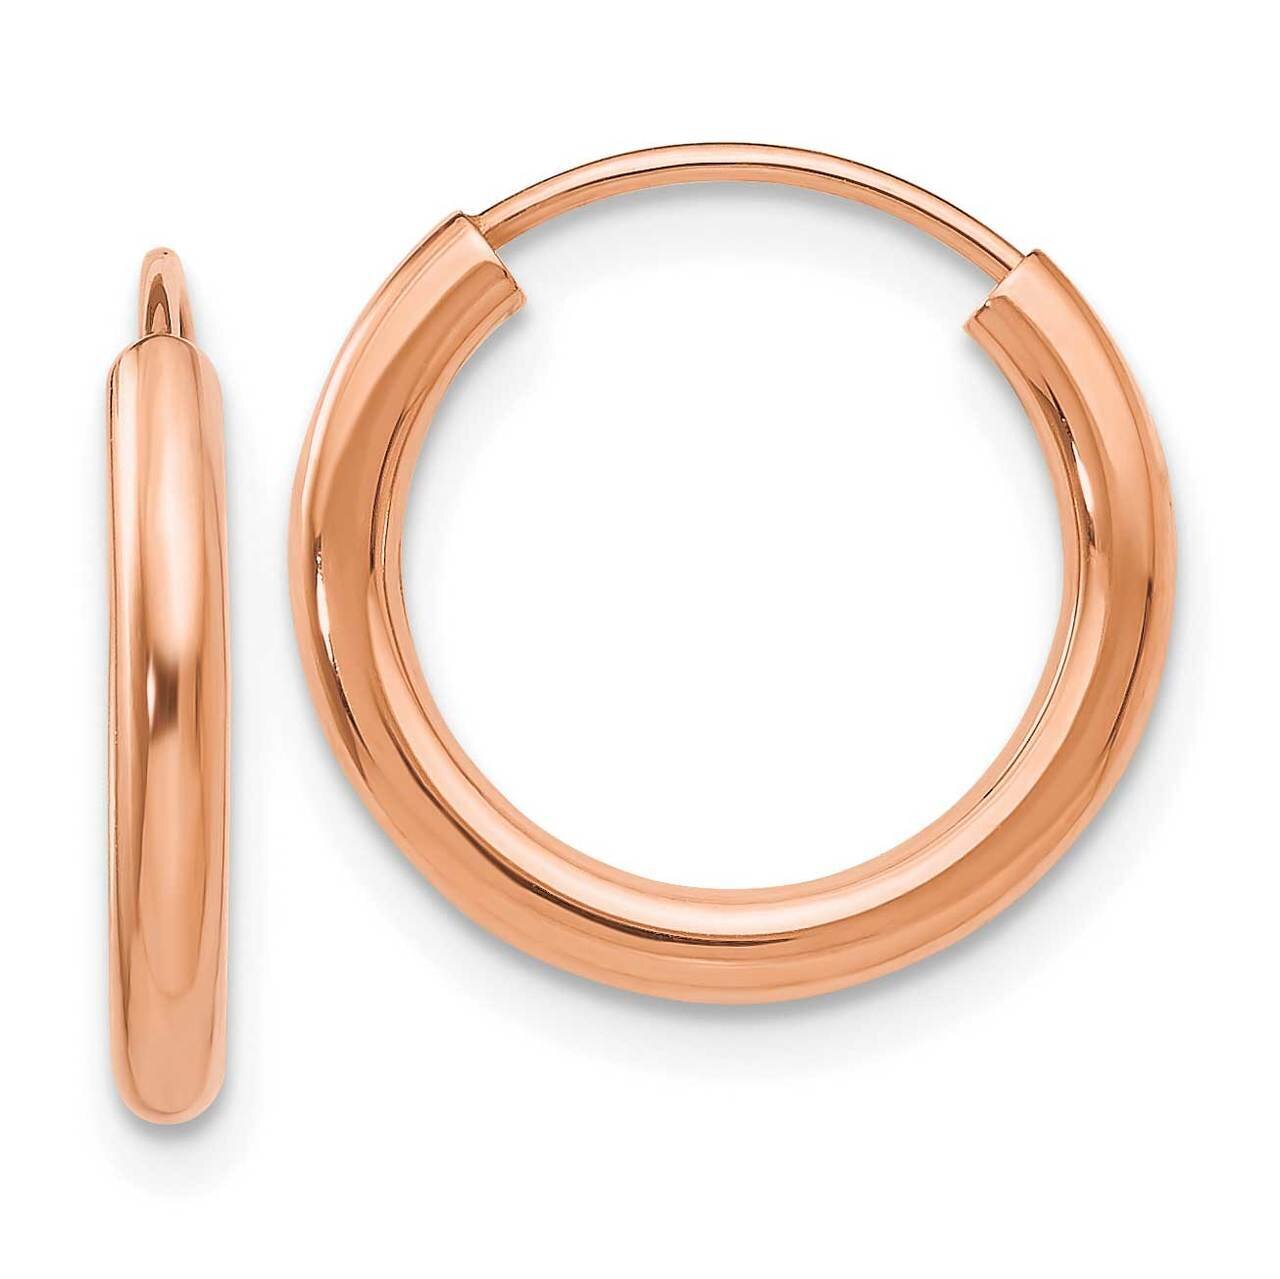 Round Endless 2mm Hoop Earrings 14k Rose Gold Polished XY1246